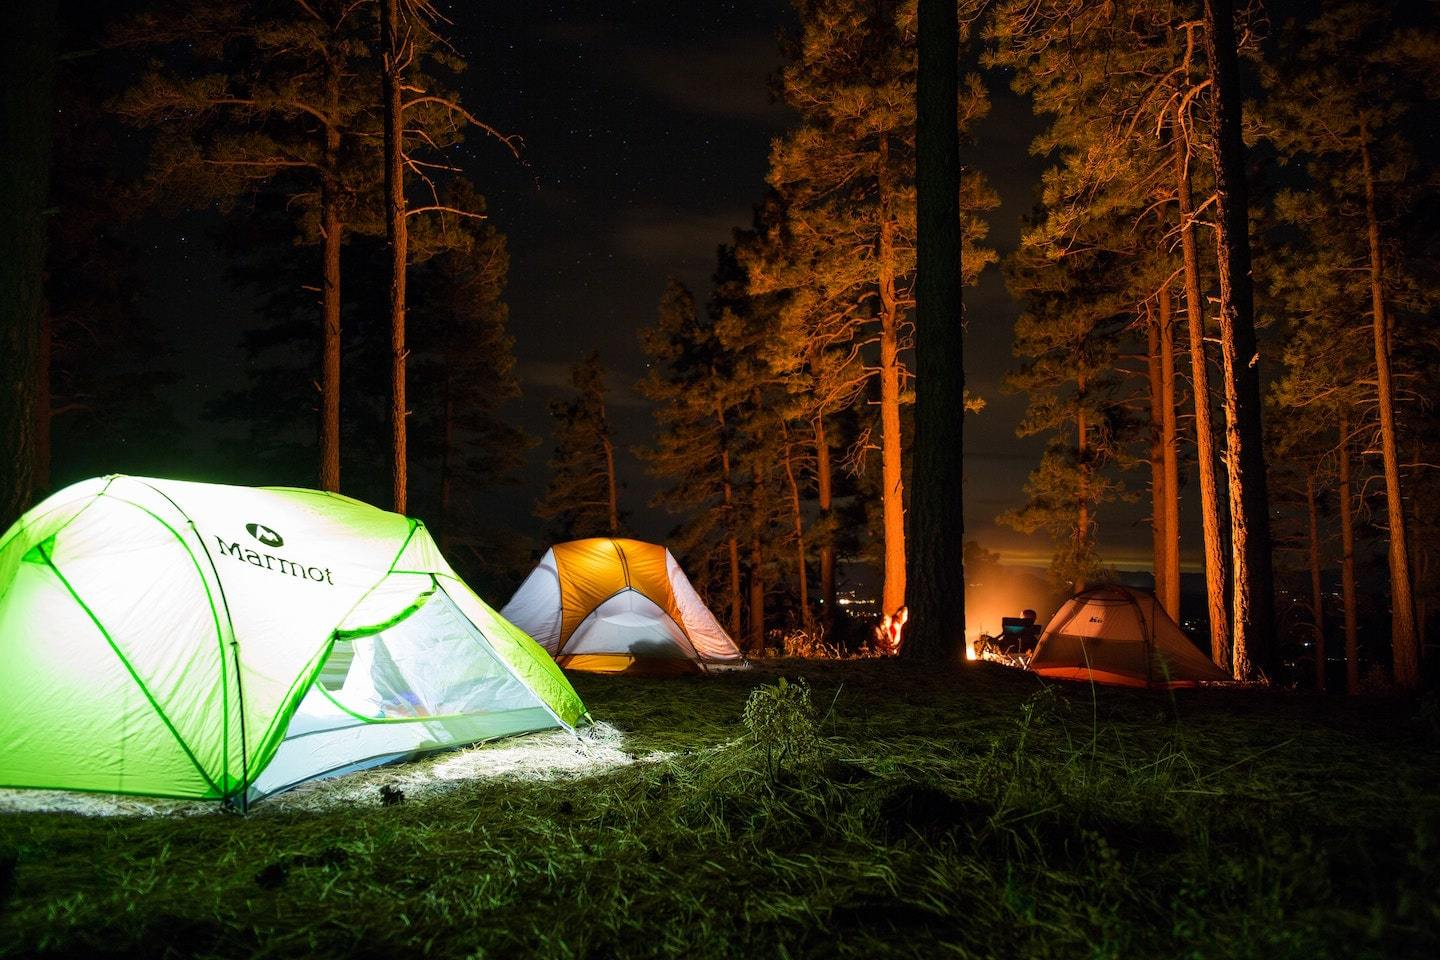 camping in forest with trees surrounding tents